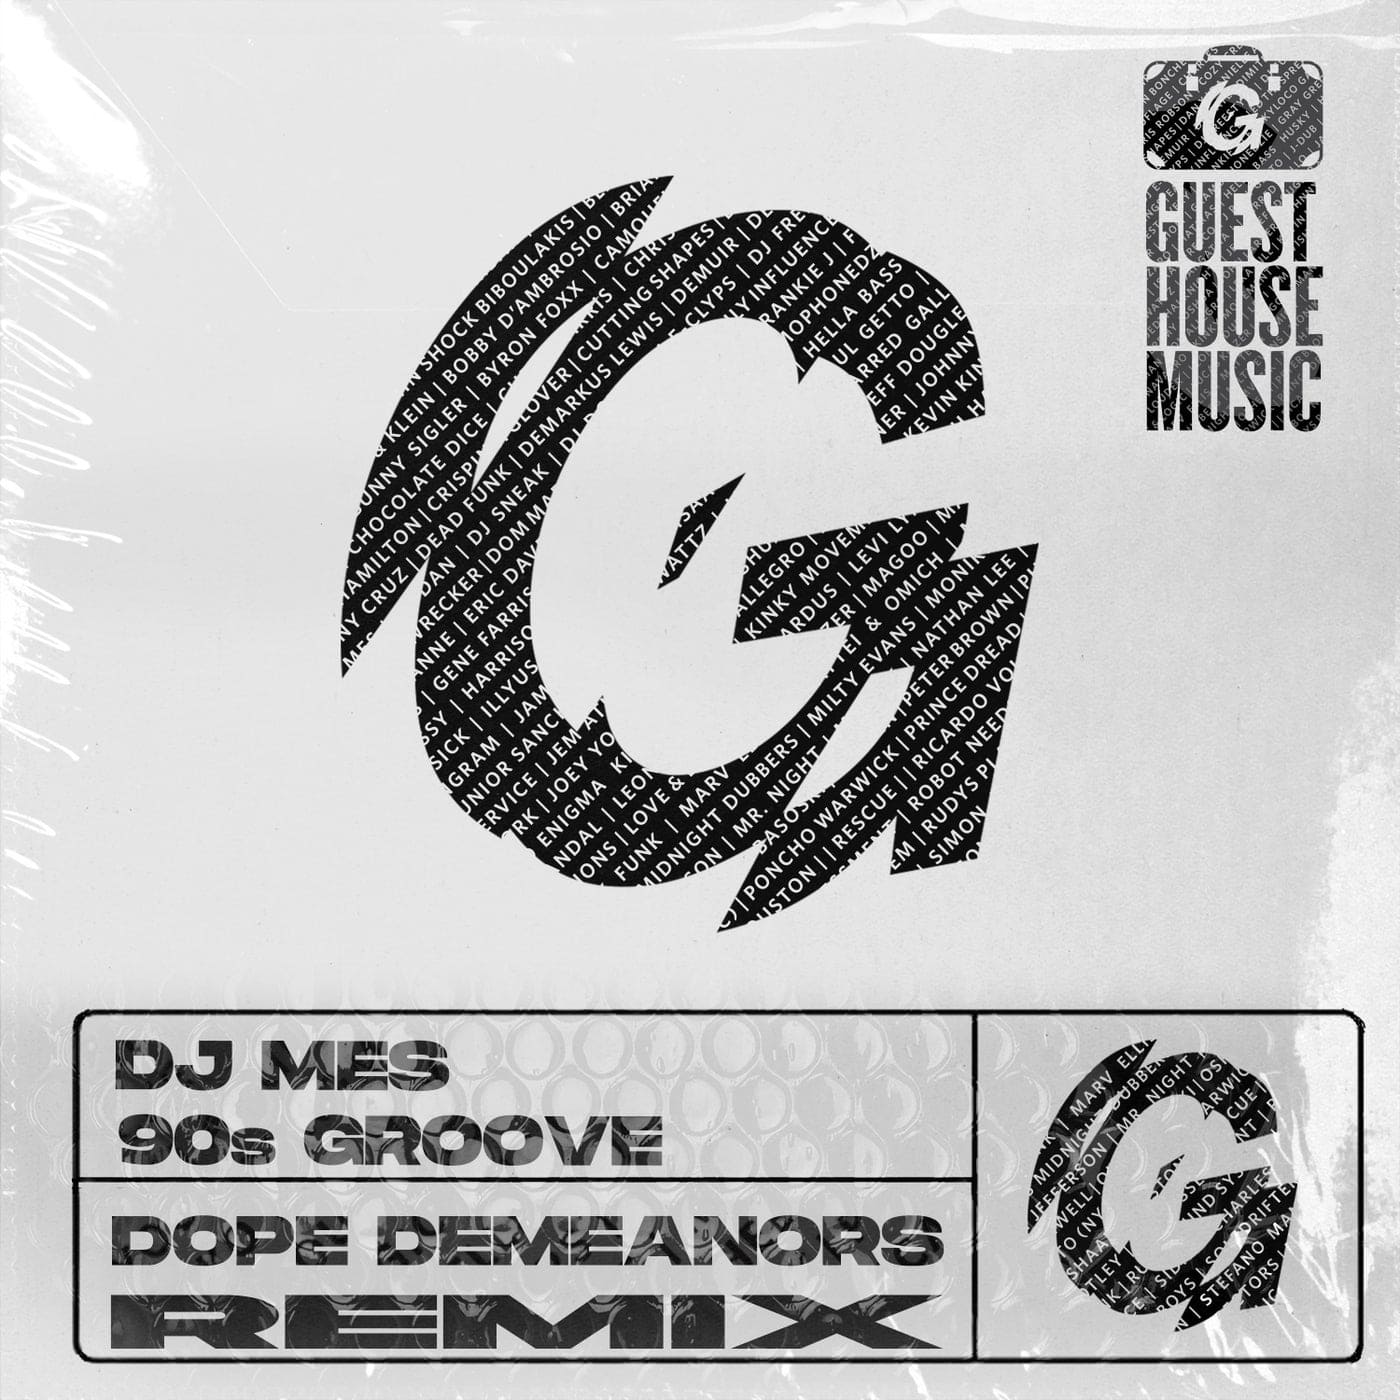 image cover: DJ Mes - 90s Groove (Dope Demeanors Remix) on Guesthouse Music